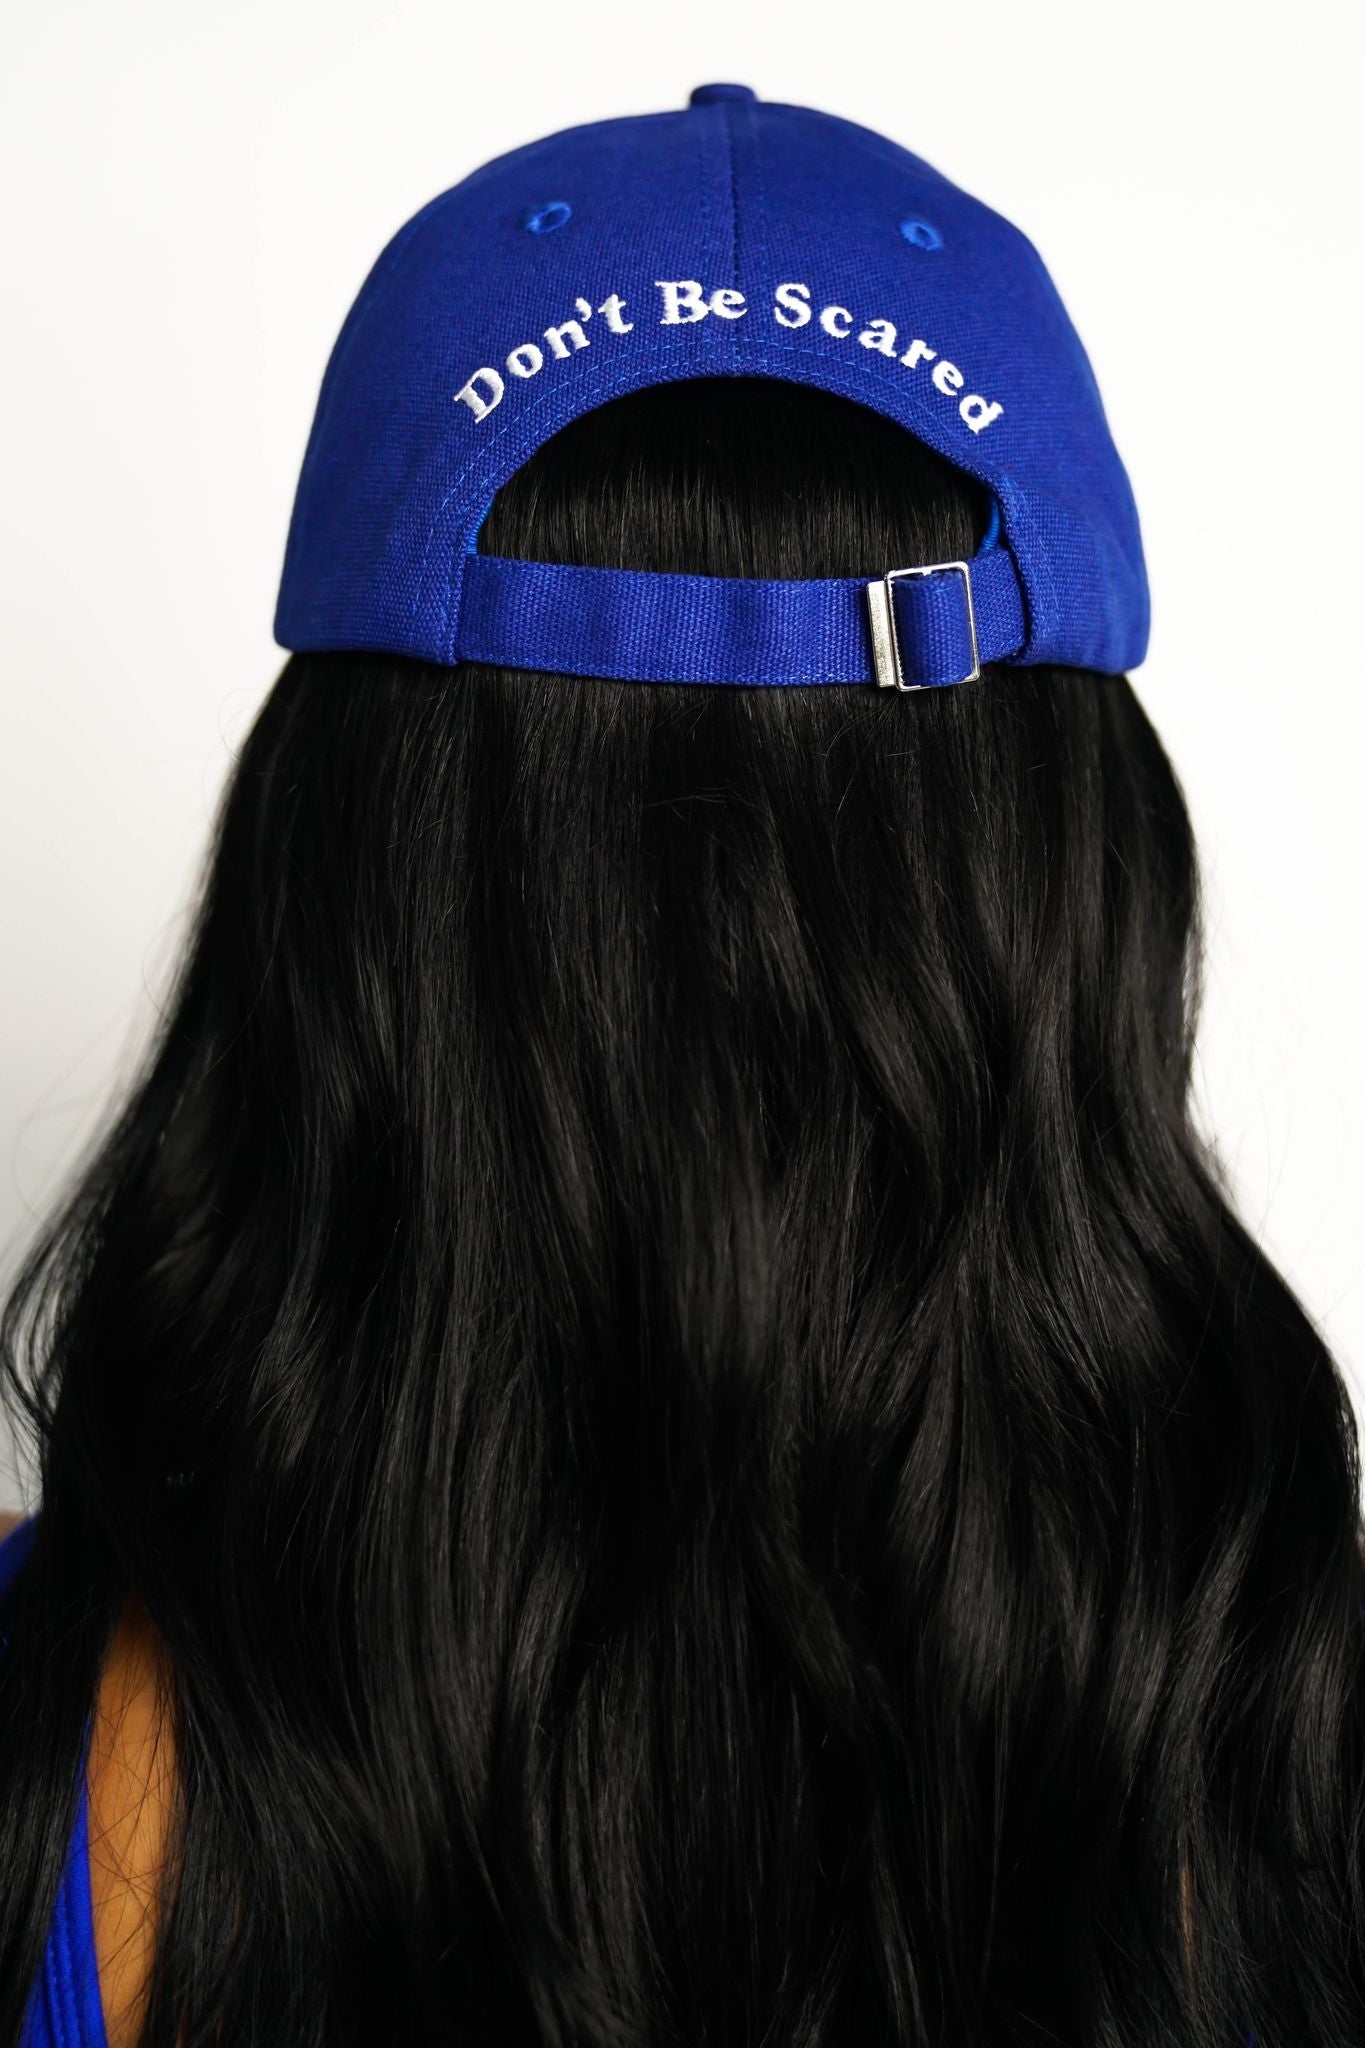 Women Caps - Don't Be Scared - Blue With White under Cap Bill